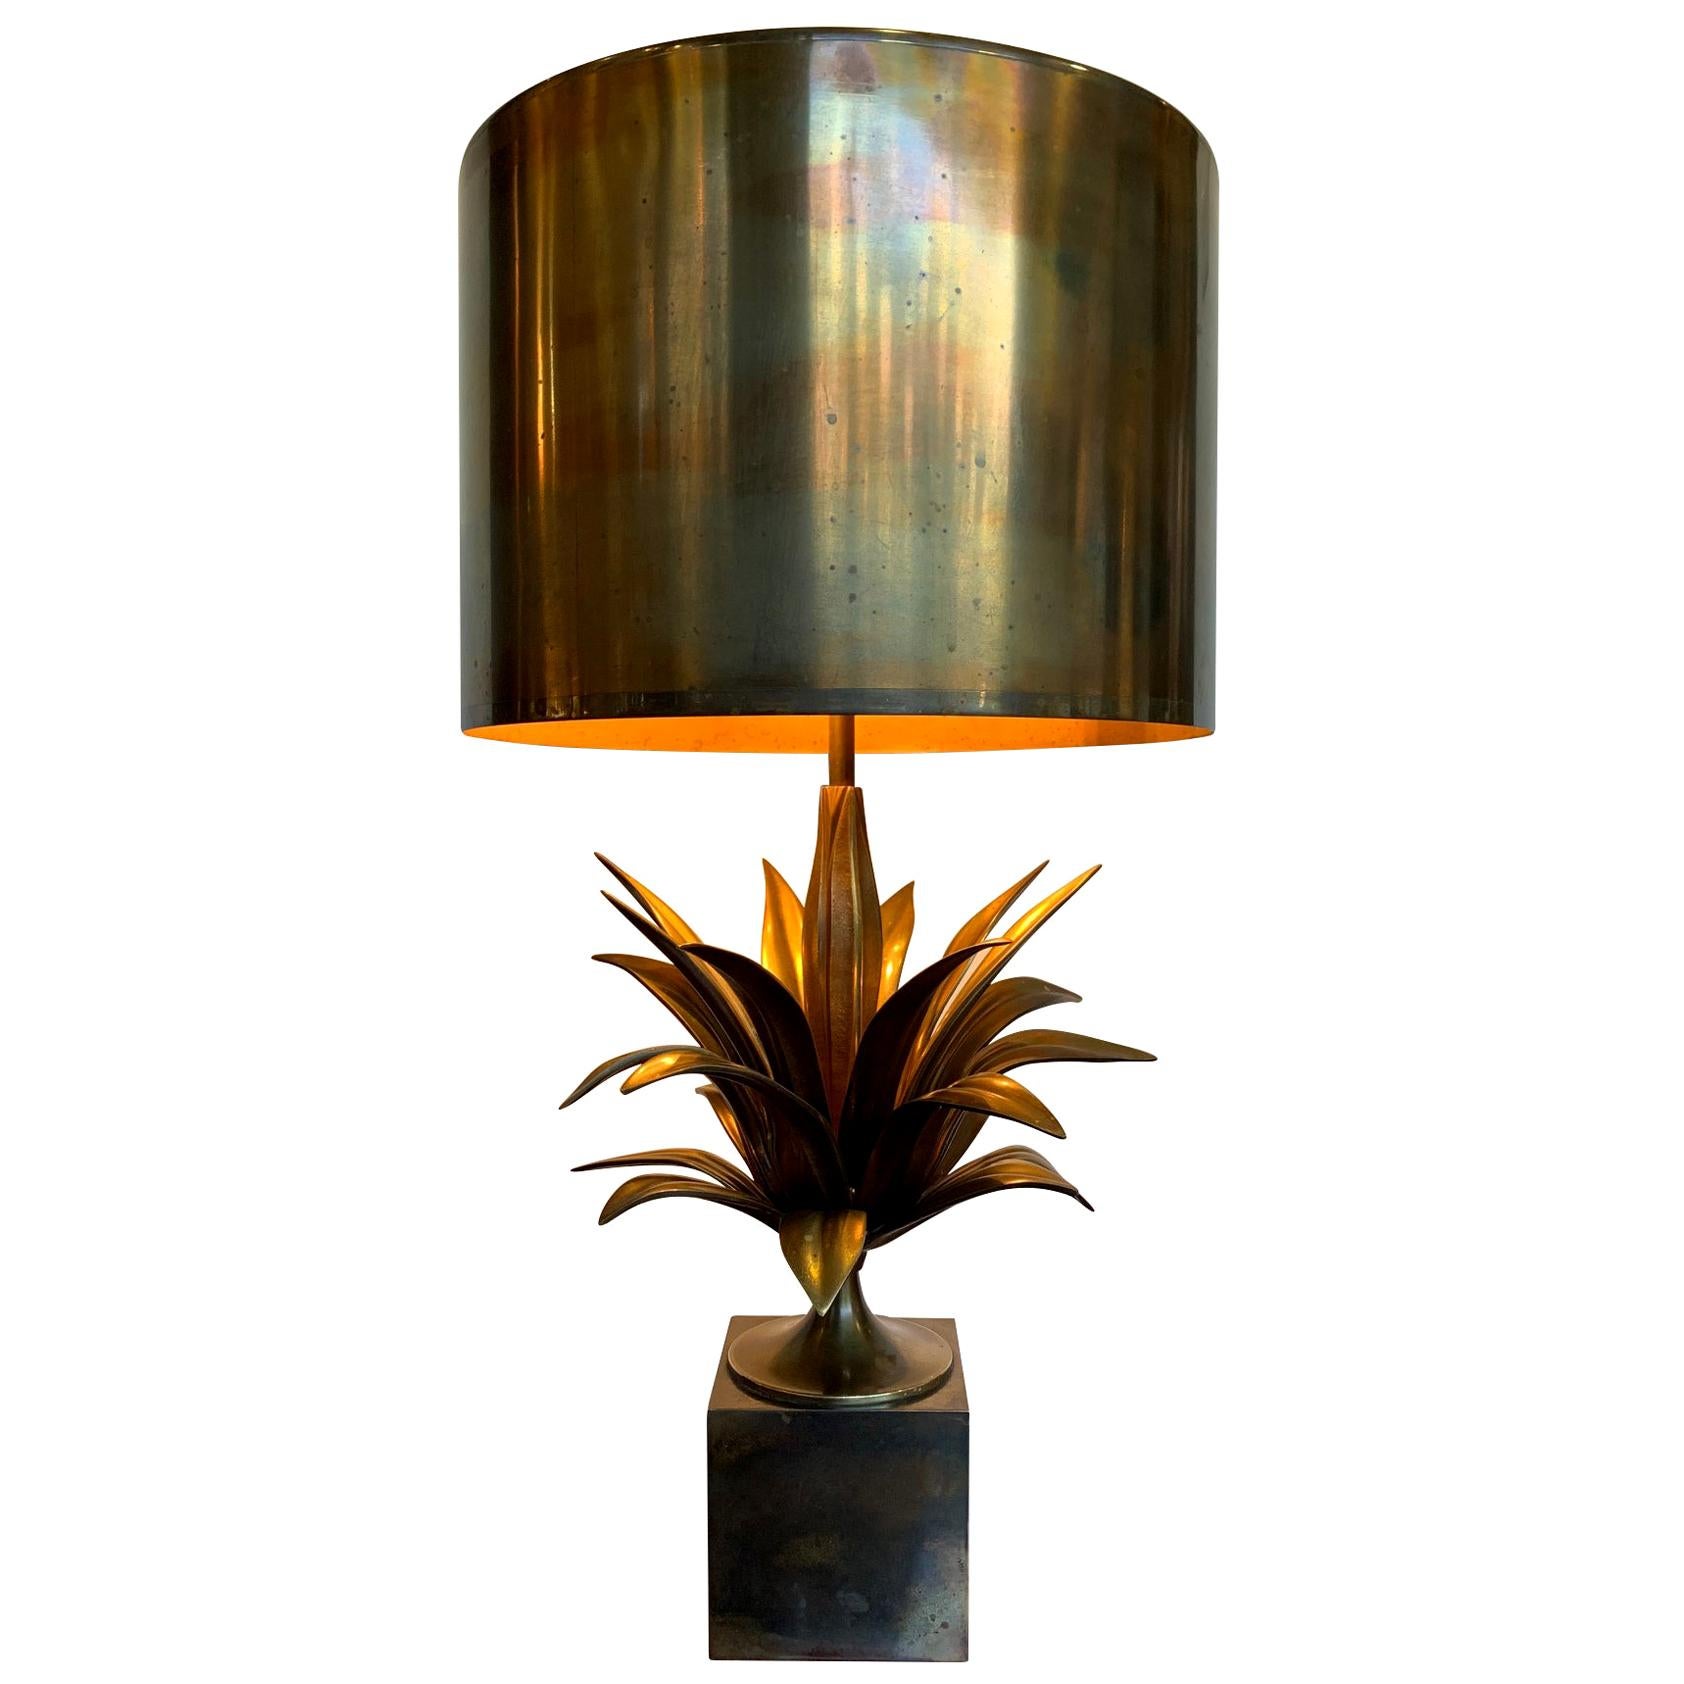 Maison Charles "Agave a Gorge" Bronze Lamps with Original Bronze Shade, Signed